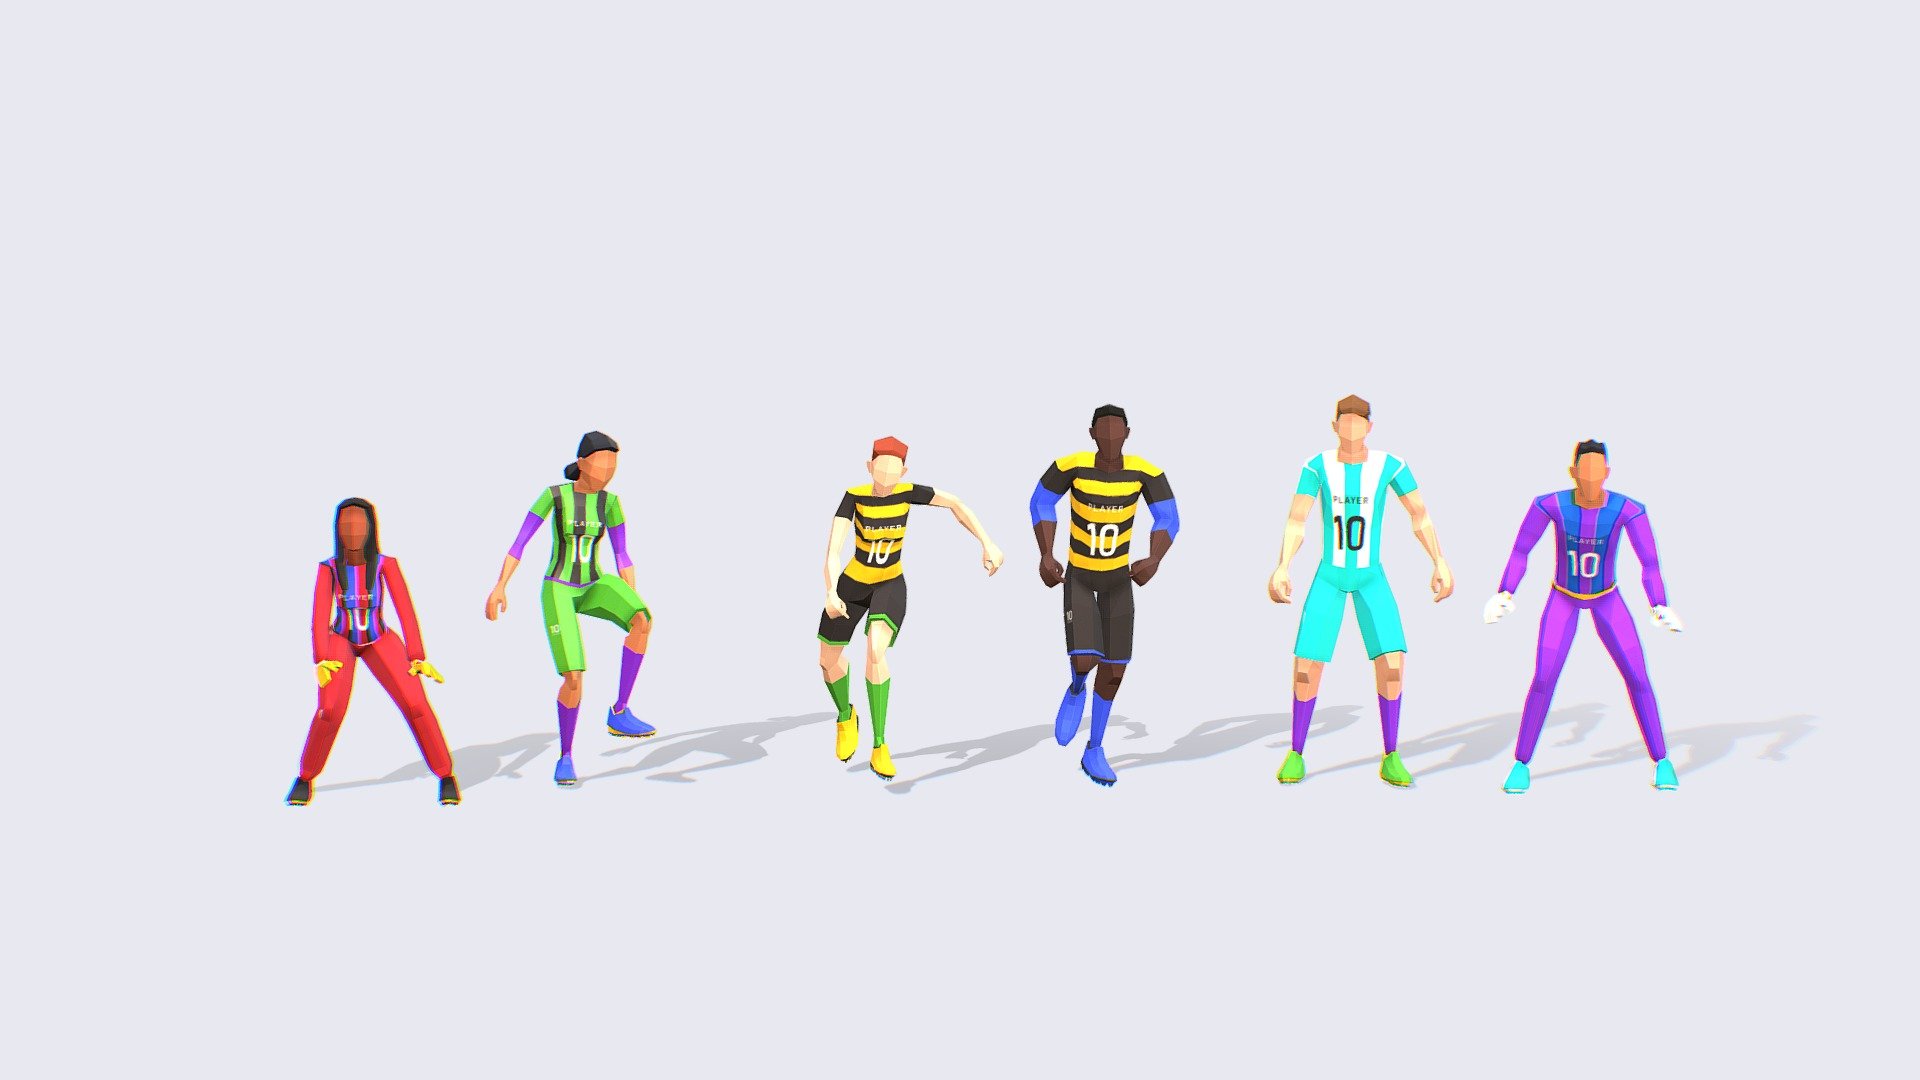 FOOTBALL SOCCER PLAYERS
Our animated and rigged low poly people packs come in a variety of styles and themes, from realistic and sci-fi to fantasy, and are expertly crafted to provide seamless integration into your workflow. Our experienced team animators and riggers have painstakingly created each character to ensure they move and behave with a lifelike quality that will captivate your audience.

Includes:




Independent Rest Pose in files: FBX, OBJ, GLB -for easy rigging

Independent Animated -FBX, BLEND (Native) -file includes all 6 animations

Textures created for the pack.

PROPS AND EXTRA MODELS INCLUDED AS SEEN ON 3D MODEL
Make your crowds stand out from your competition with our collection of low poly people with amazing possibilities.





This pack is the first that we upload with our 3RD GENERATION of Animated Low-Poly People and it will be included in The Compilation
 - Football Soccer Players  - Animated & Rigged - Buy Royalty Free 3D model by Studio Ochi (@studioochi) 3d model